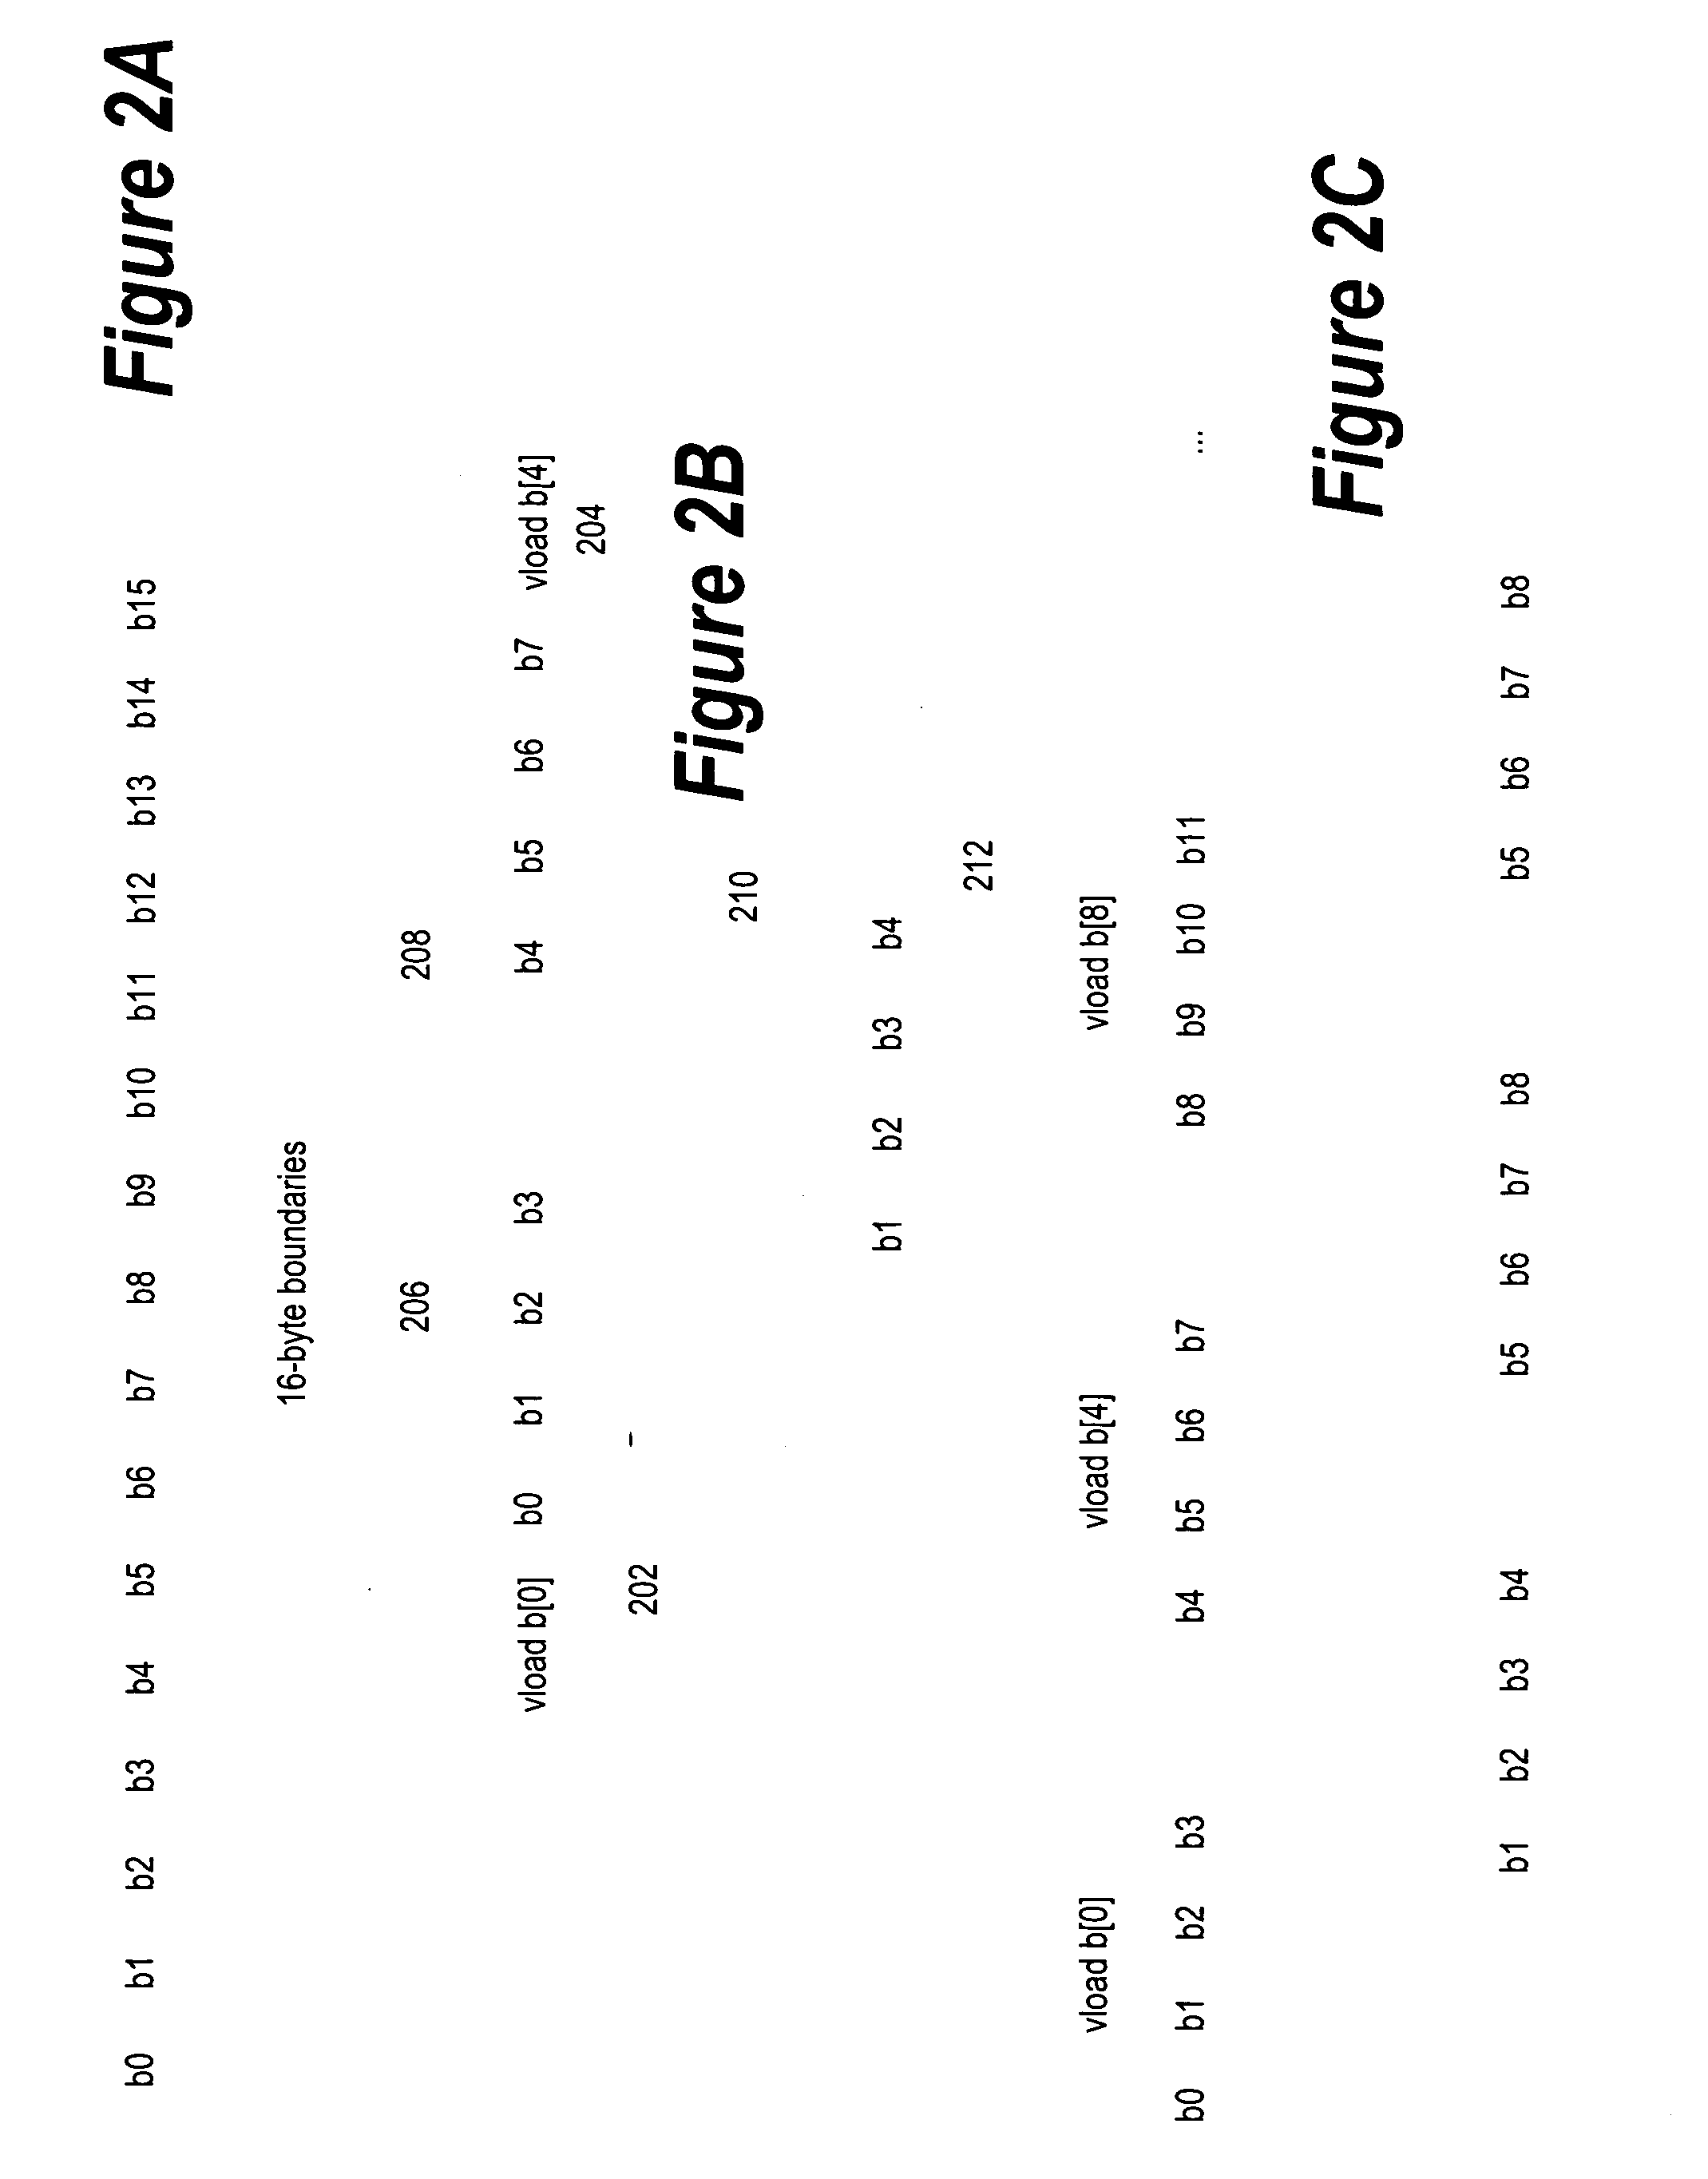 Framework for efficient code generation using loop peeling for SIMD loop code with multiple misaligned statements